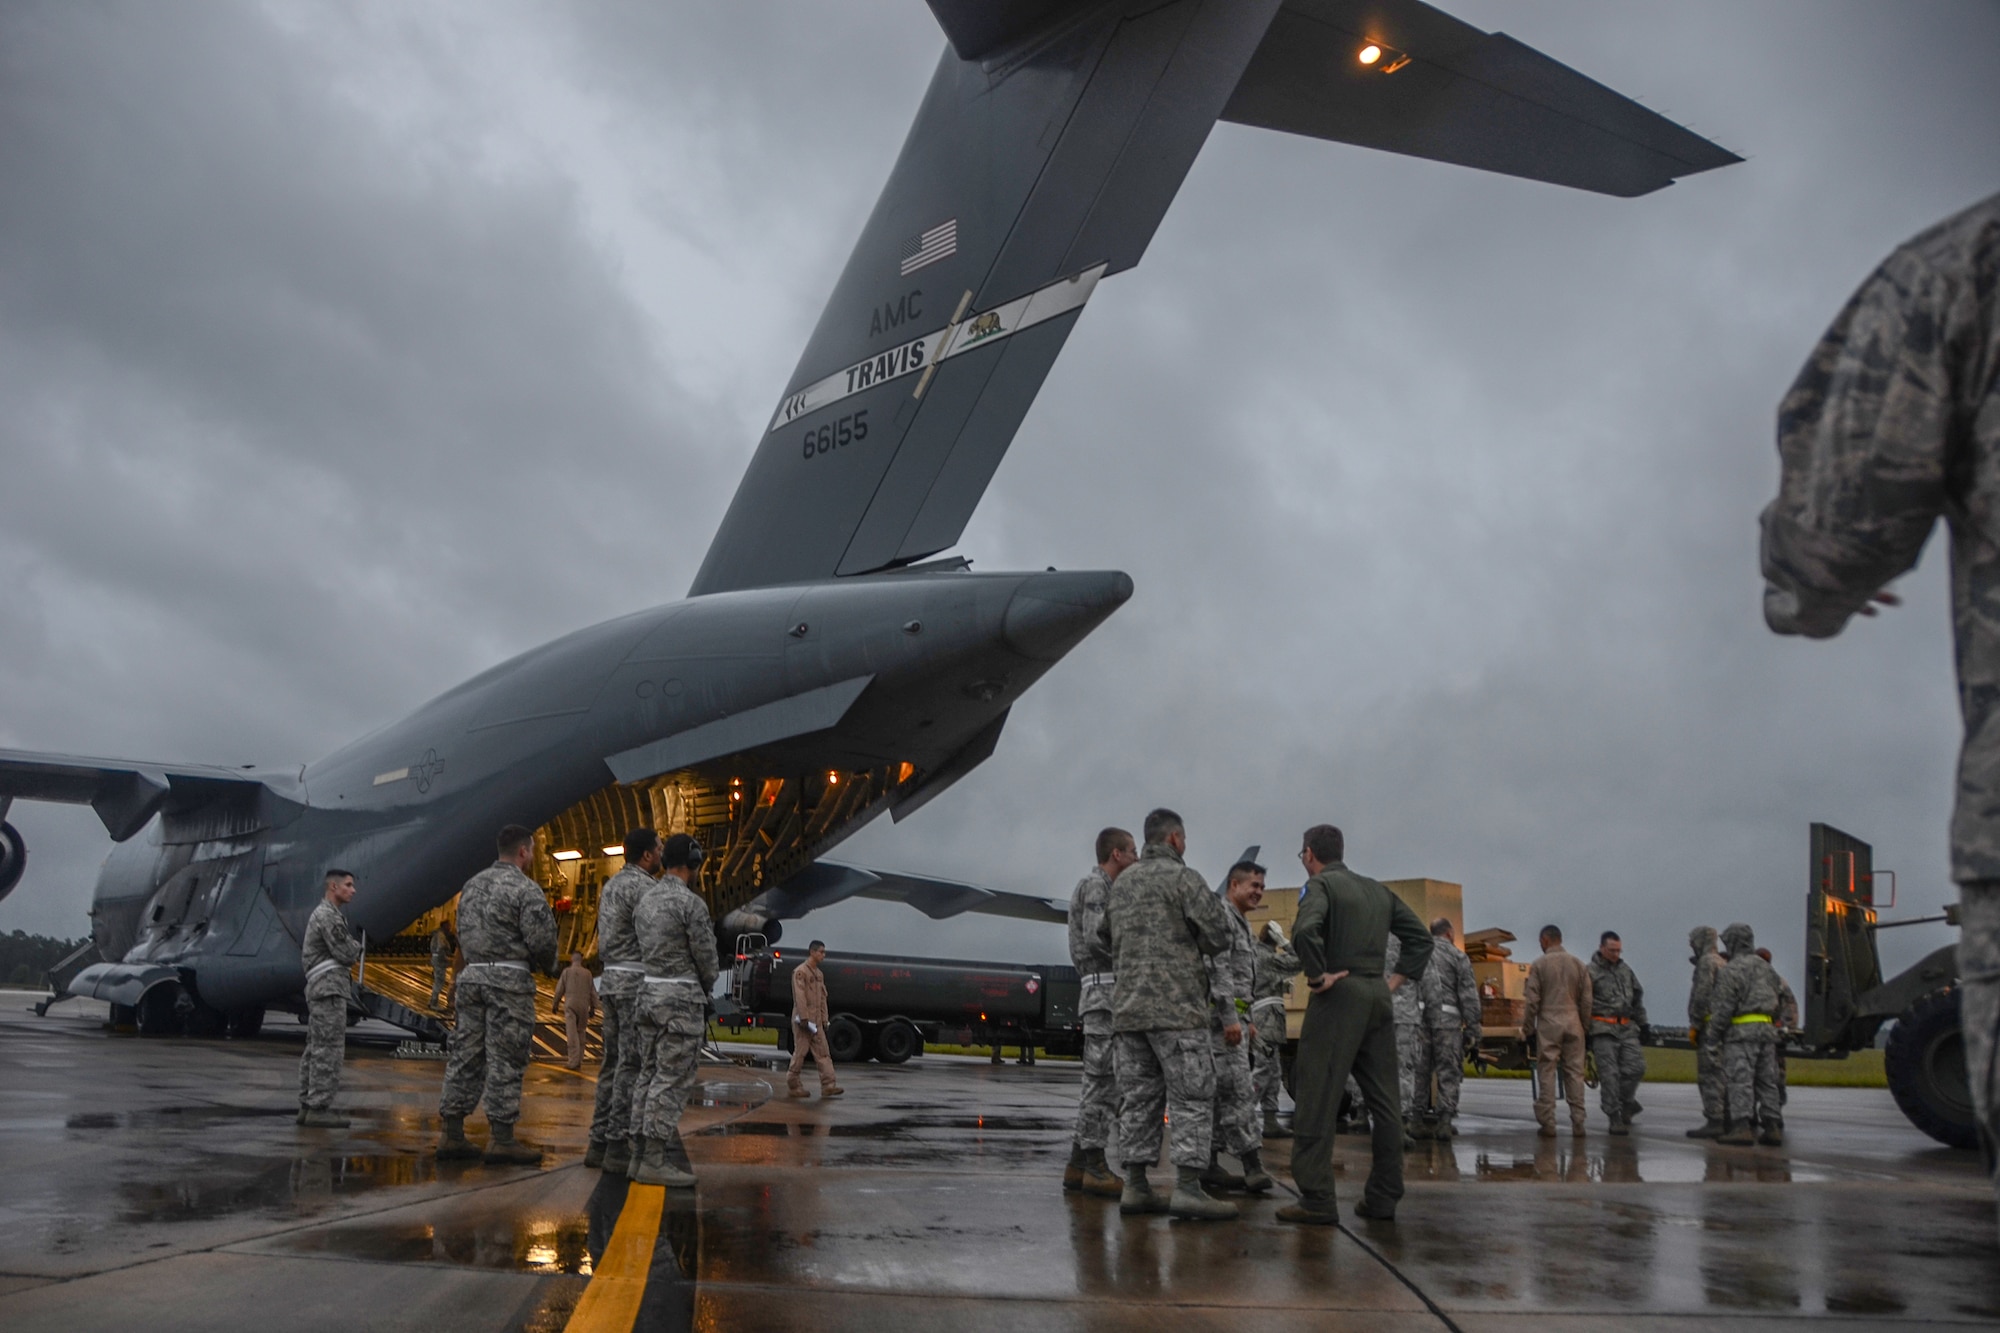 A U.S. C-17 Globemaster III, a large military transport aircraft, belonging to the 21st Airlift Squadron from Travis AFB, Calif., is being loaded at McEntire Joint National Guard Base, S.C., Oct. 7, 2016. Equipment from the South Carolina Air National Guard's 245th Air Traffic Control Squadron was loaded onto the aircraft in preparation for a deployment in support of Operation INHERENT RESOLVE. (U.S. Air National Guard photo by Airman 1st Class Megan Floyd)